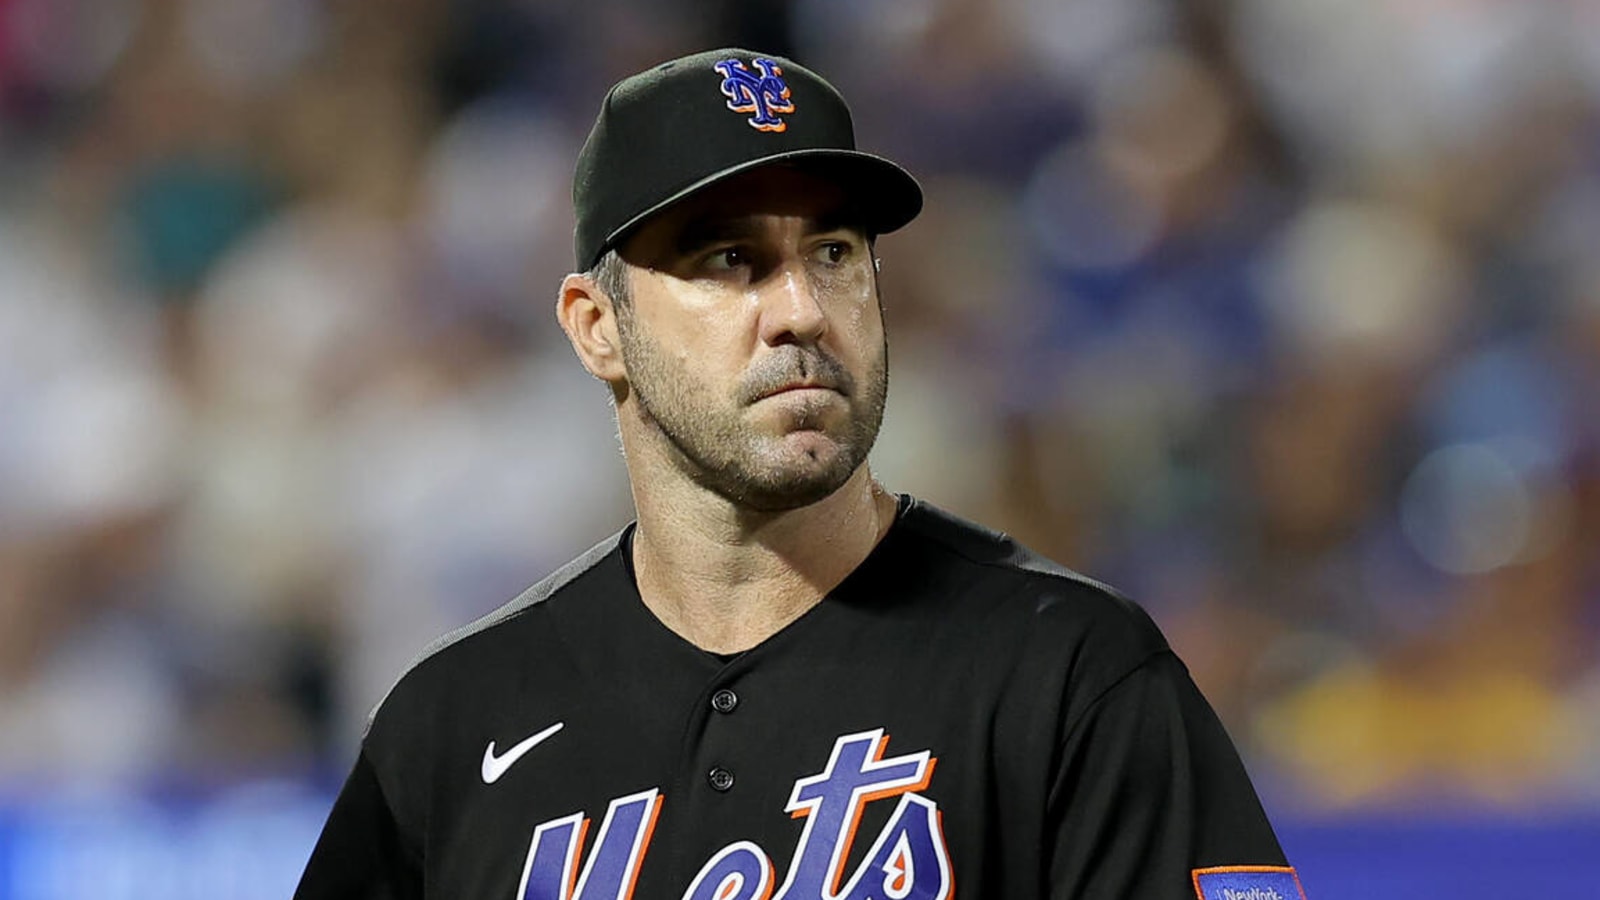 Mets trading 3-time Cy Young Award winner Justin Verlander to the